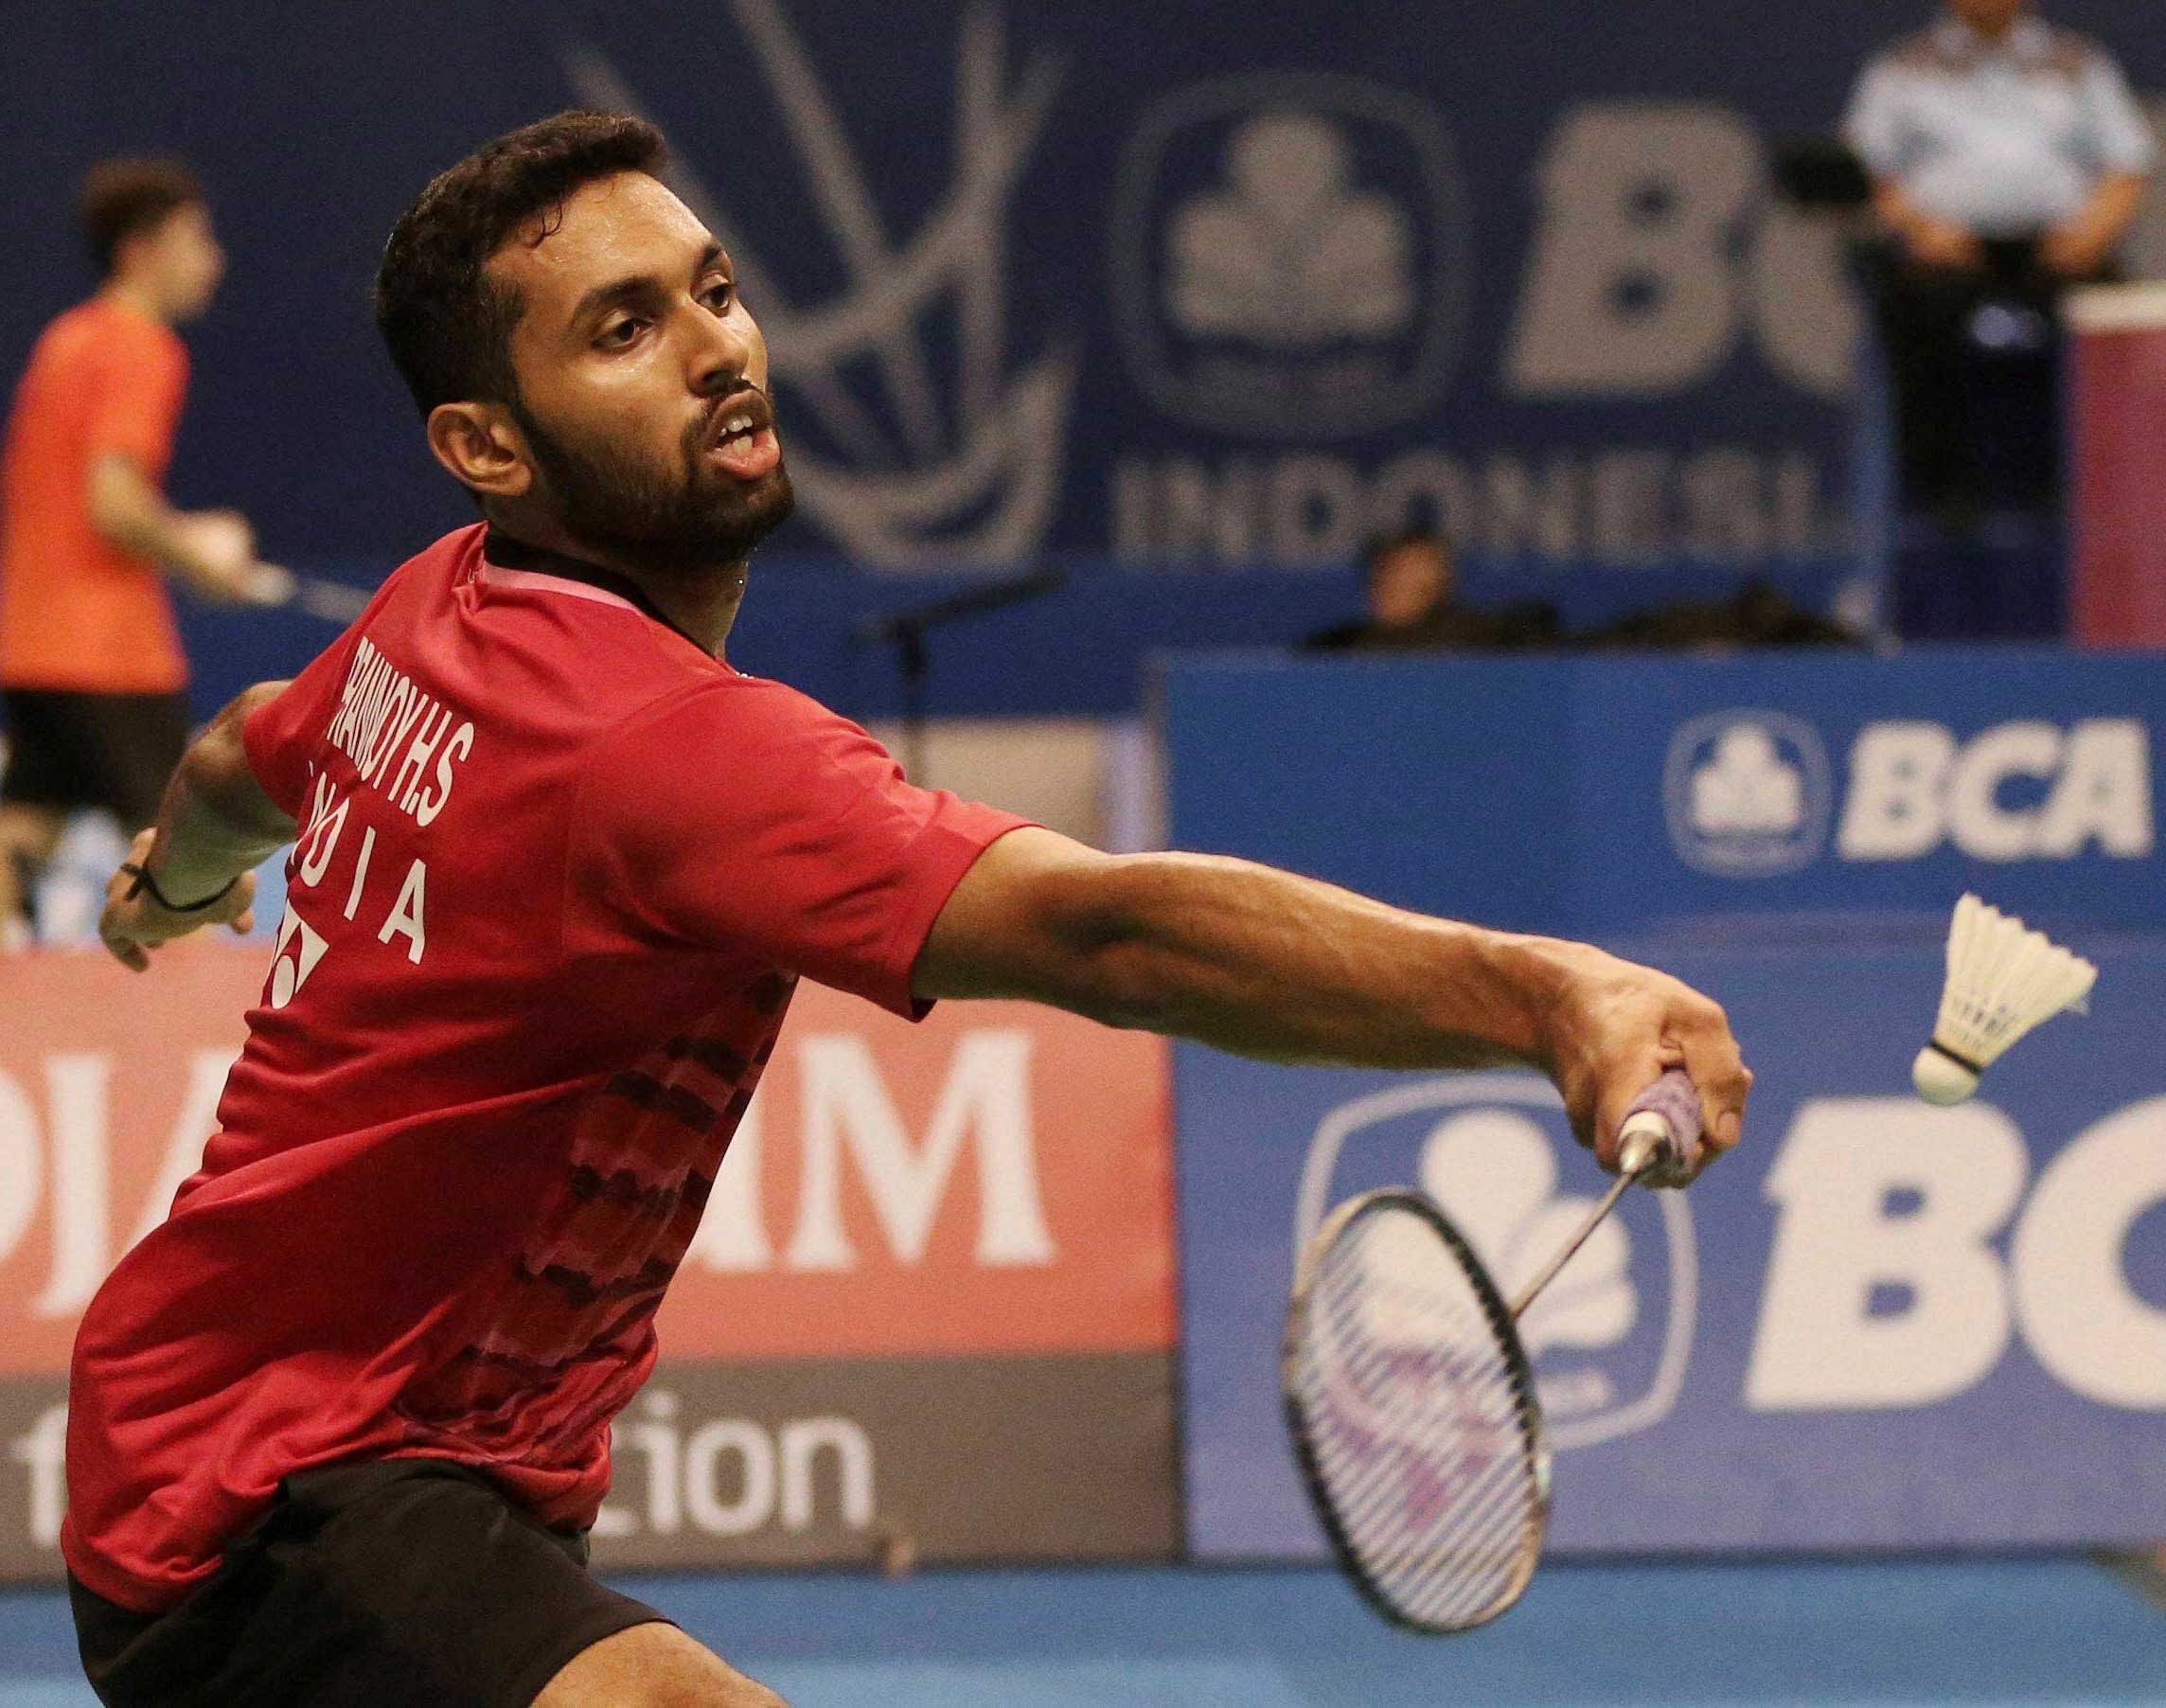 India's HS Prannoy plays against Malaysia's Lee Chong Wei during the second round of the Indonesia Open badminton championship in Jakarta, Indonesia, Thursday, June 15, 2017. AP/PTI